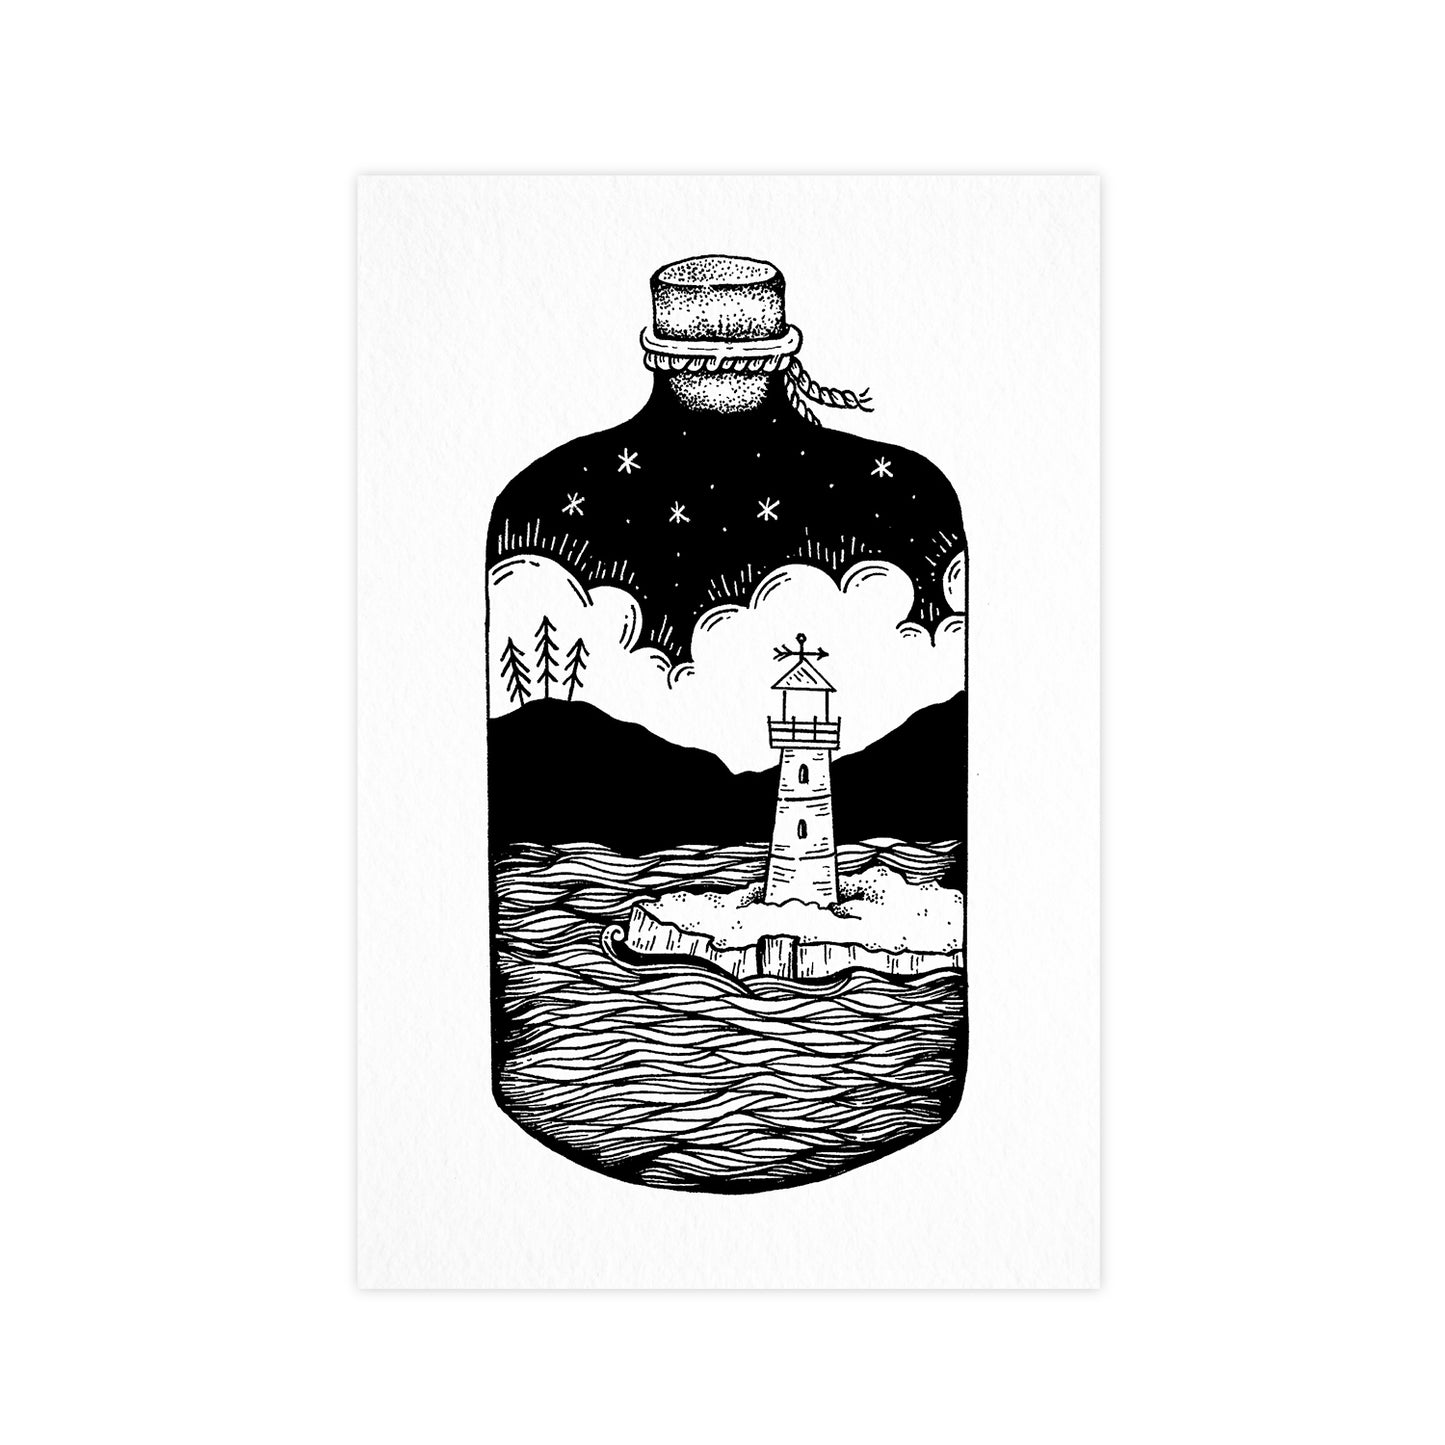 Lighthouse in a Bottle -  Postcard